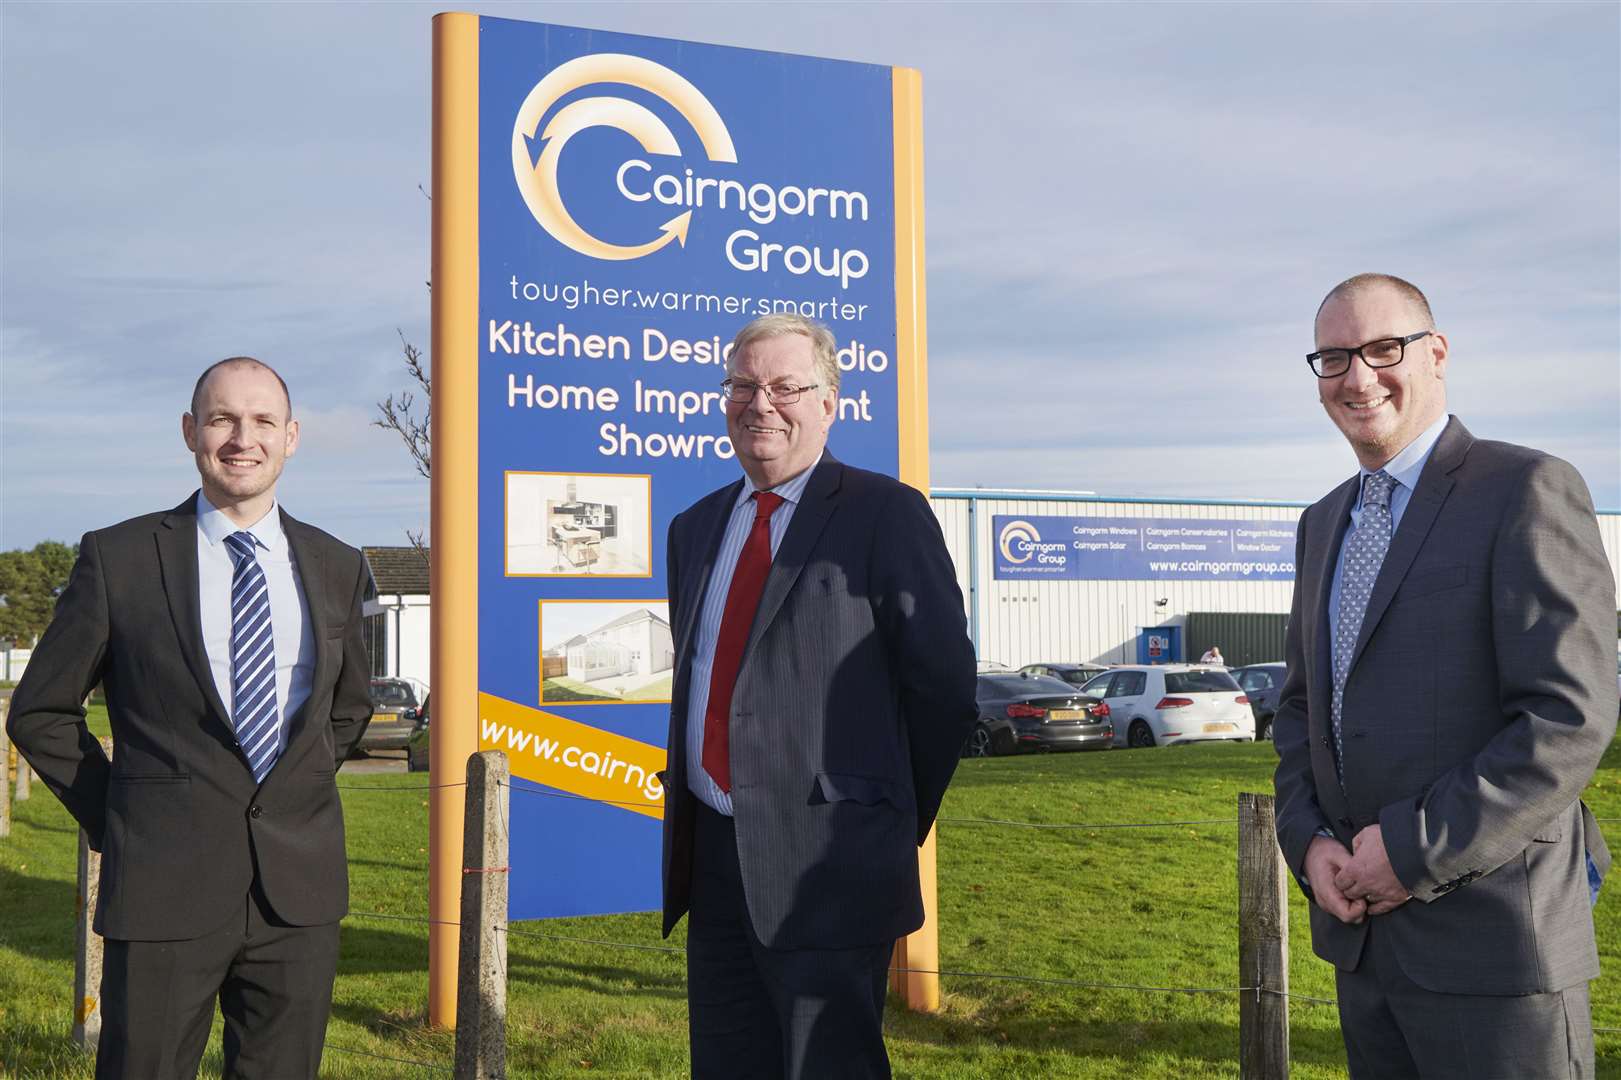 Cairngorm Group handover: David Dowling (centre) with sons Scott and Chris (glasses)